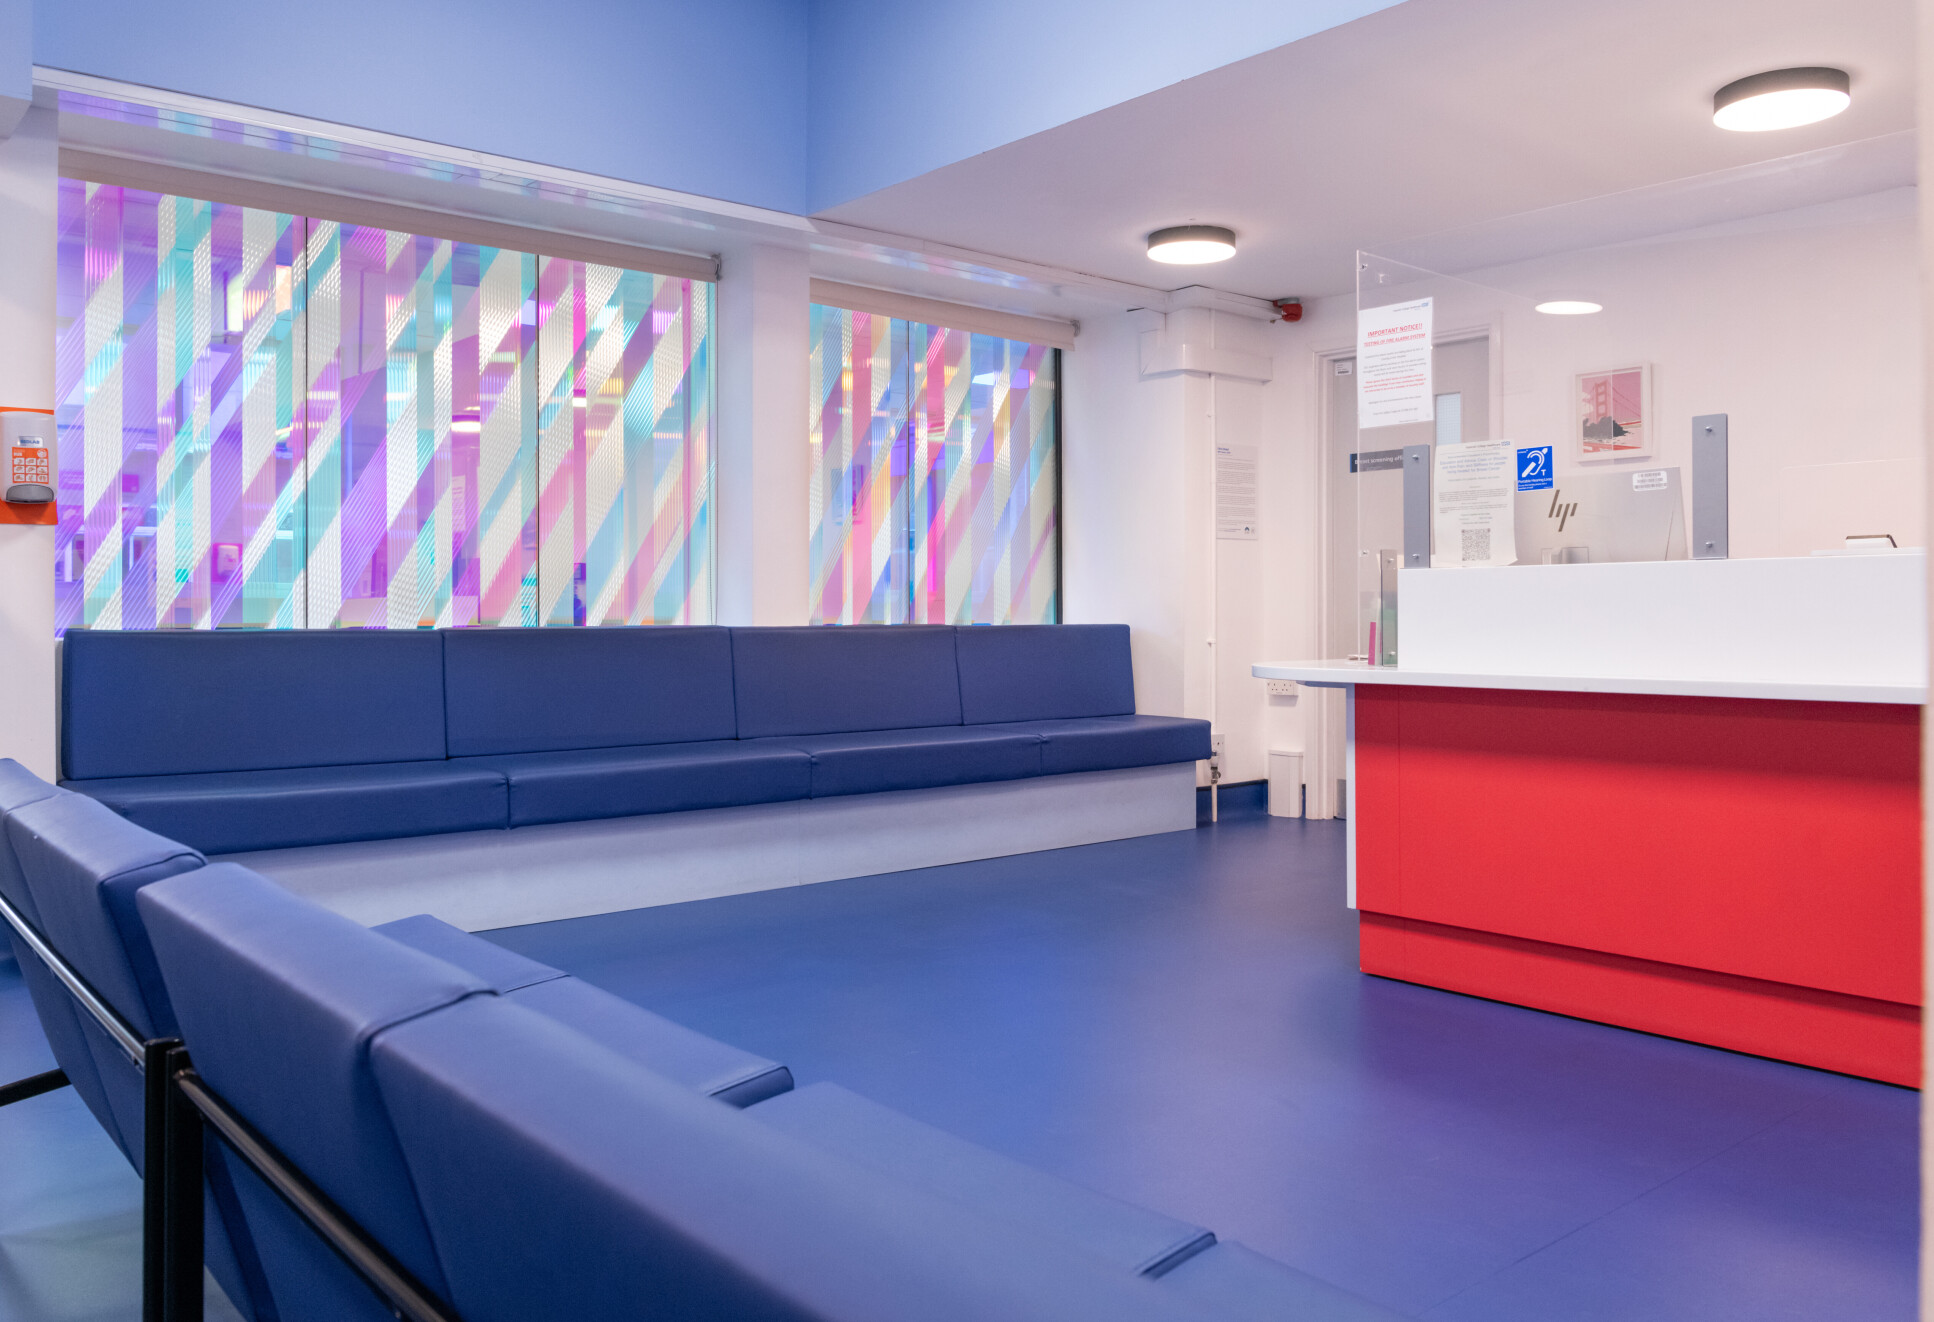 Waiting room with blue benches and rainbow glass in wall